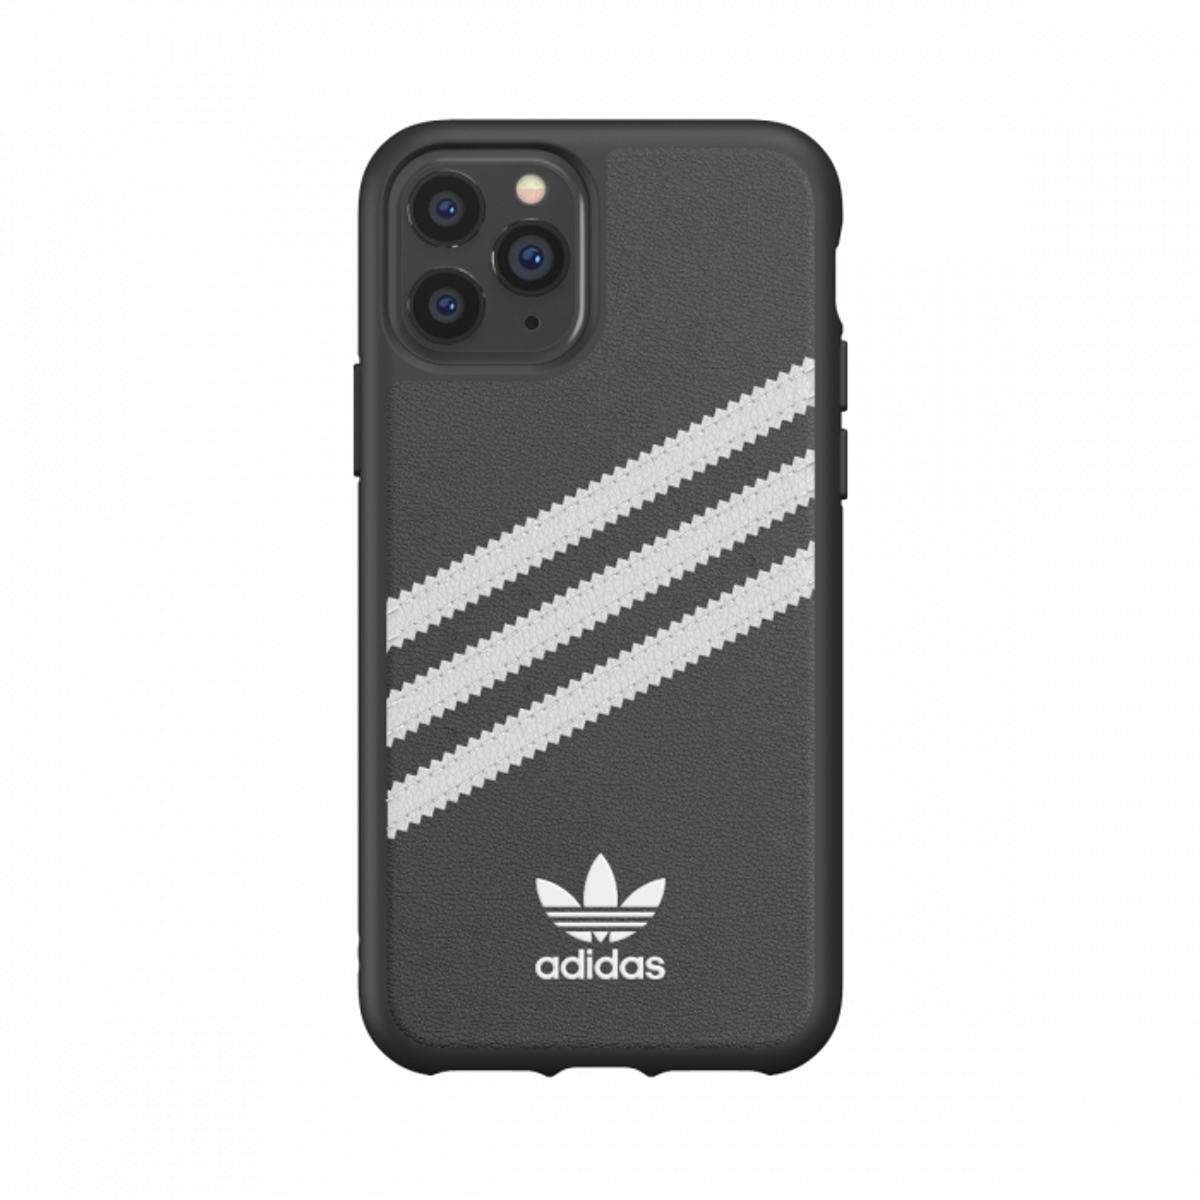 iPhone MOULDED BL/WH, CASE 36279 Apple, IP Schwarz/Weiß PRO ADIDAS OR 11 Bookcover, 11 Pro,